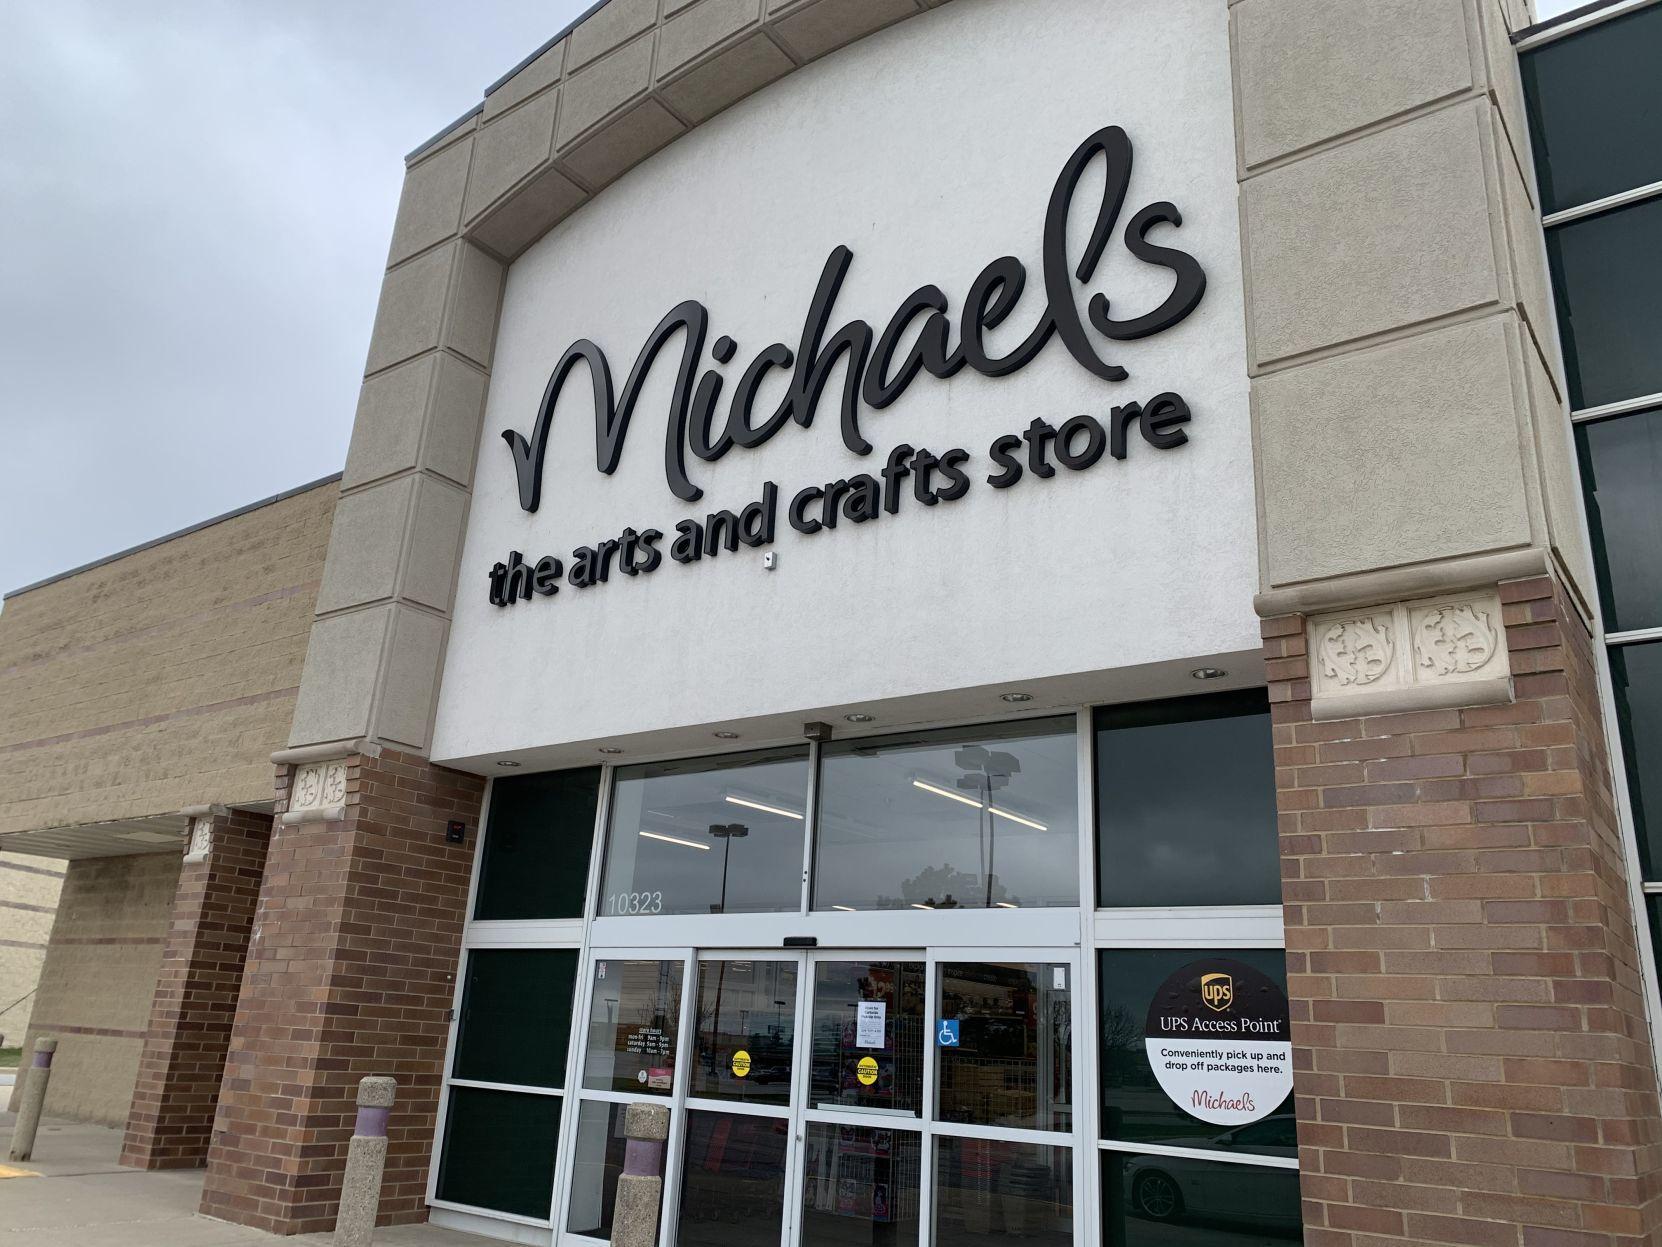 Update Authorities Close Michaels To The Public Highland Craft Store To Offer Curbside Pickup Latest Headlines Nwitimes Com